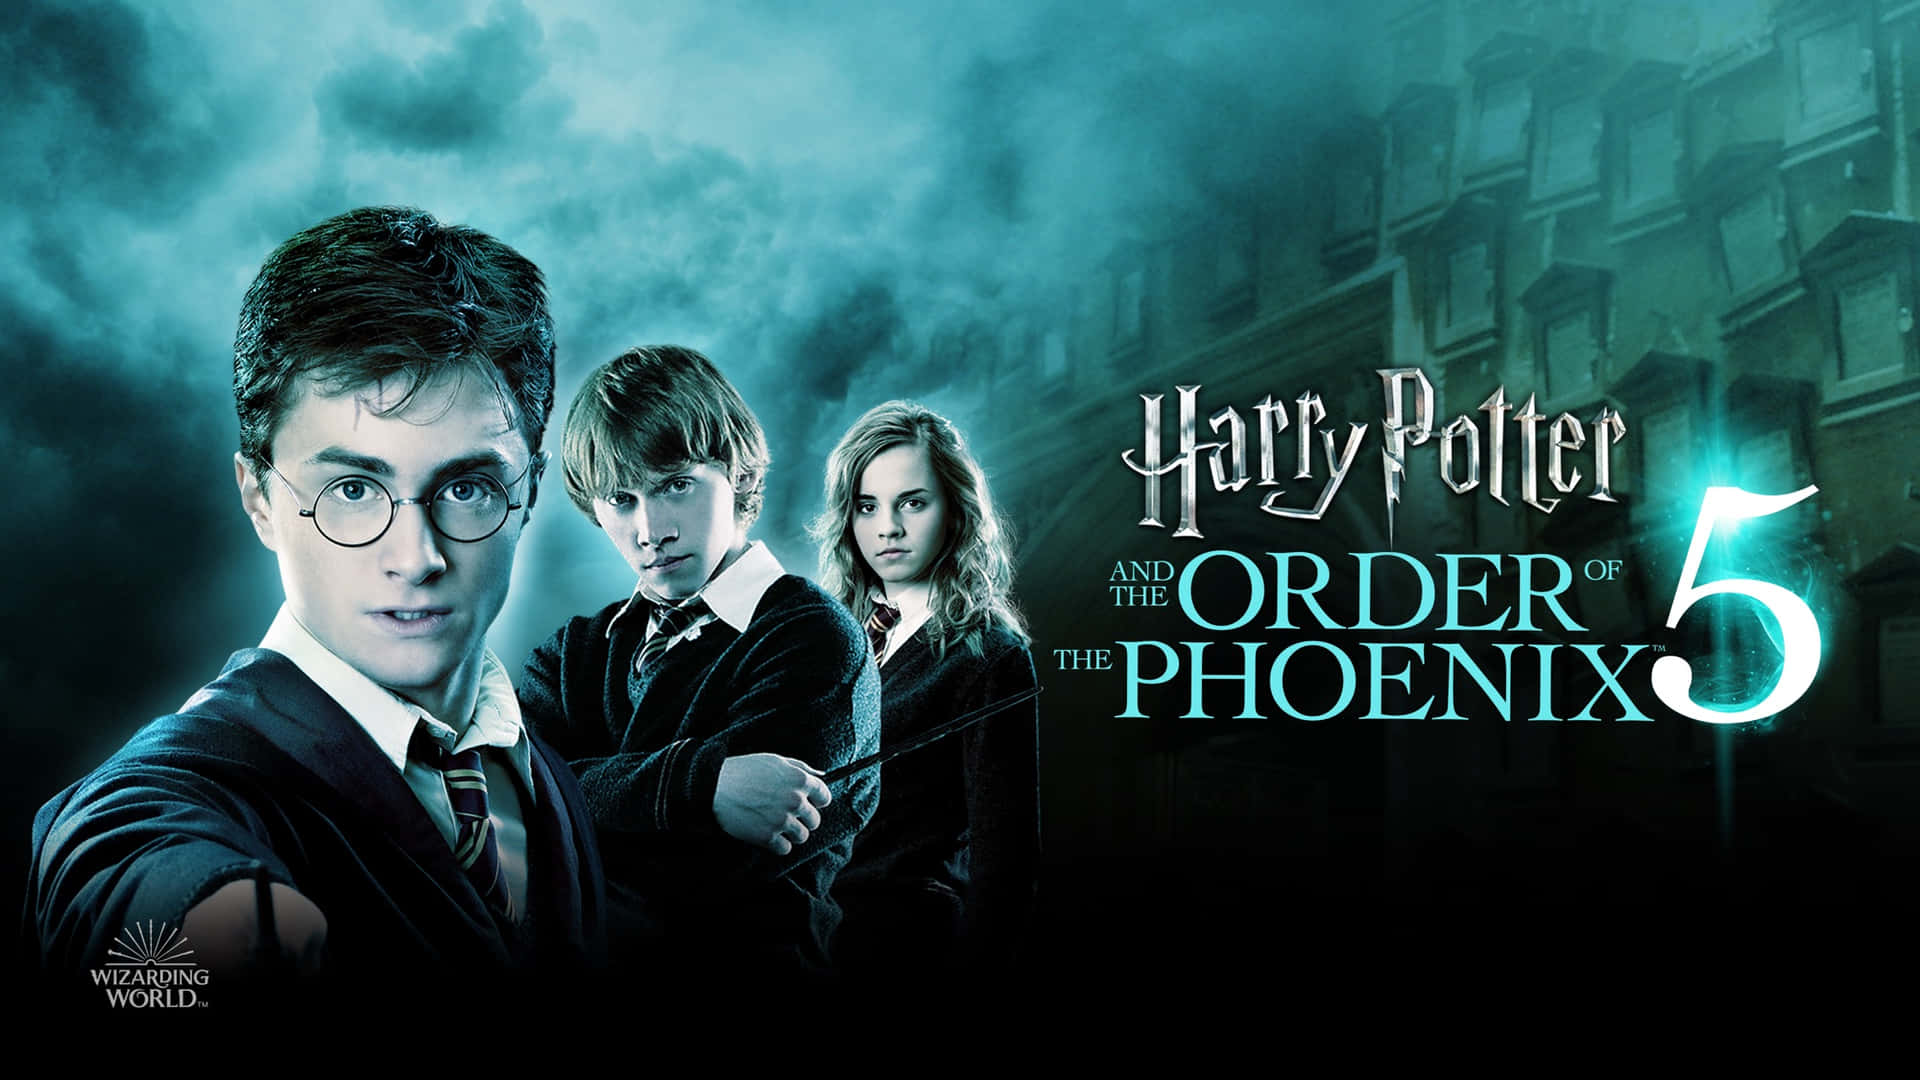 Join the Order of Phoenix and fight against evil! Wallpaper